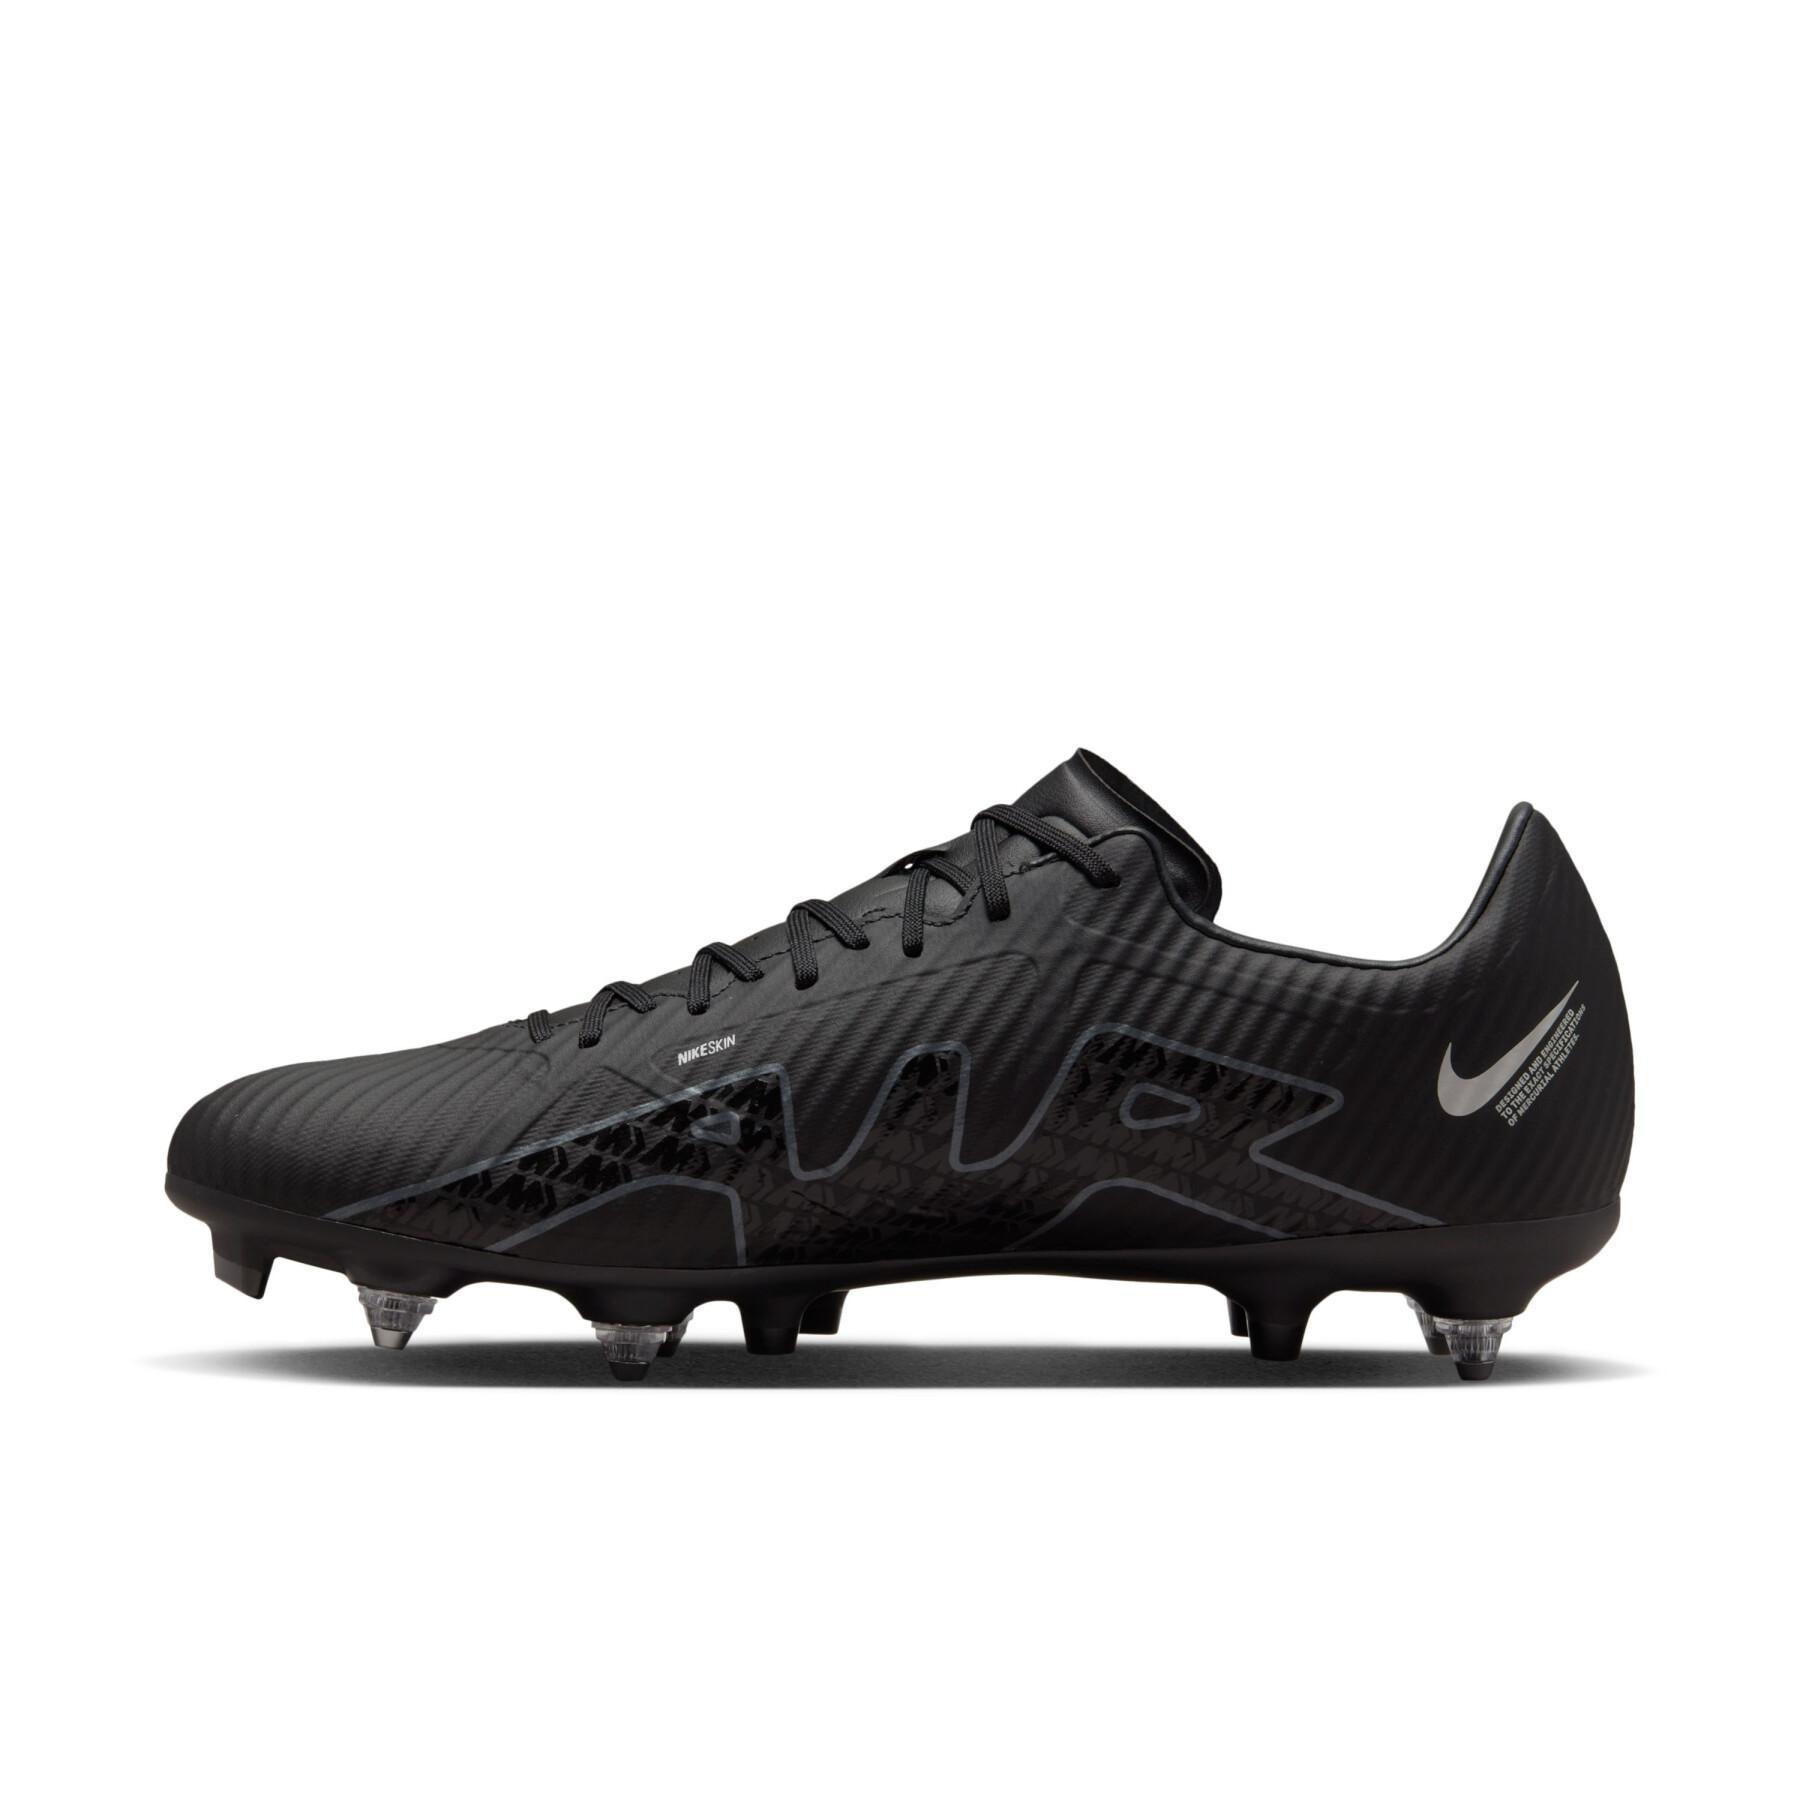 Soccer shoes Nike Zoom Mercurial Vapor 15 Academy SG-Pro - Shadow Black Pack